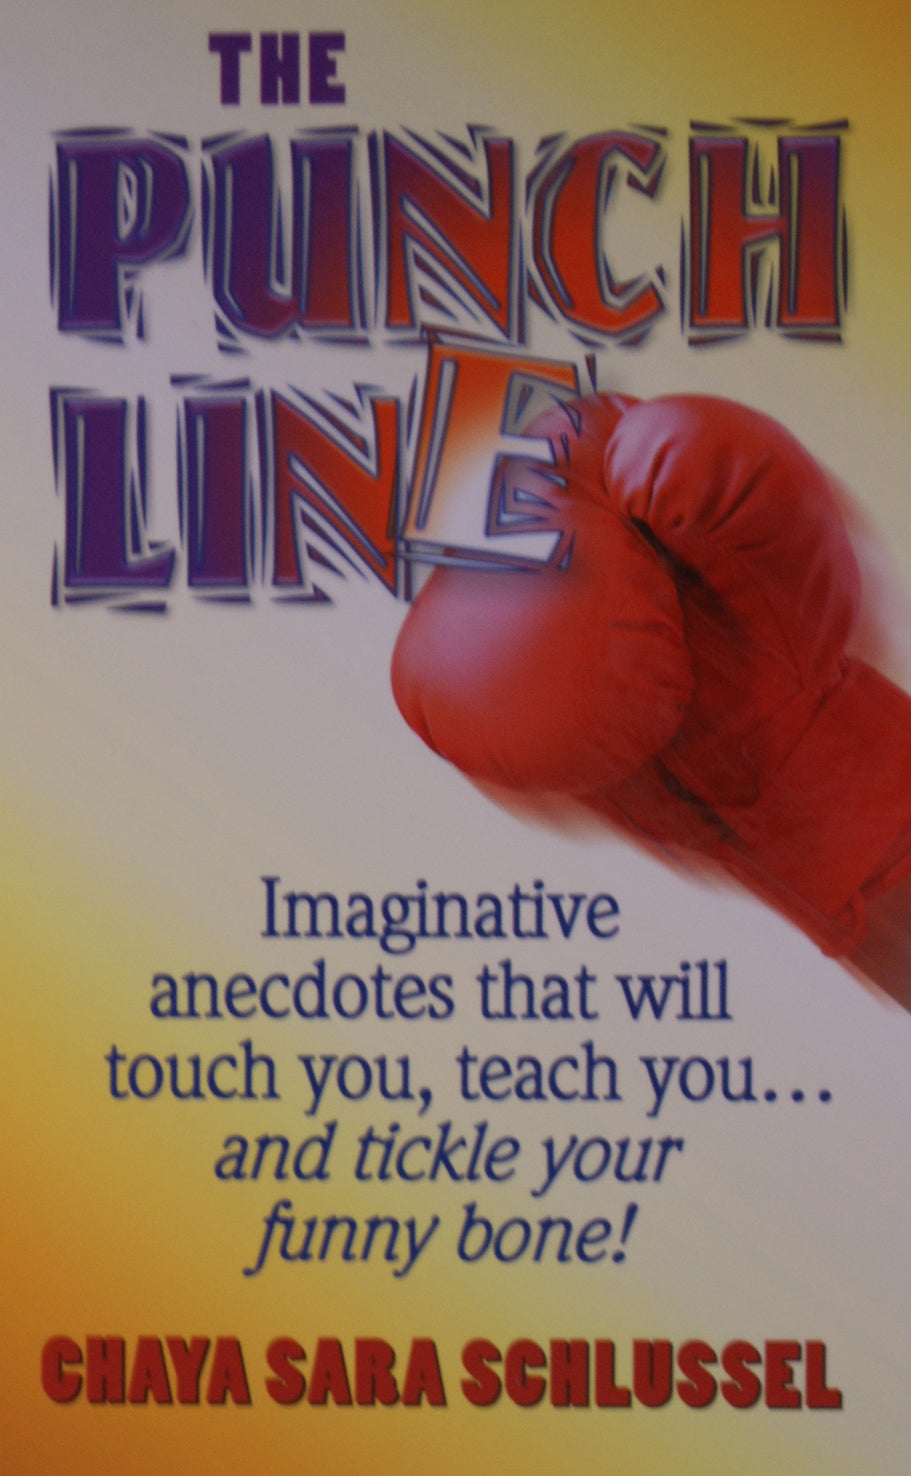 The Punch Line - Imaginative anecdotes that will touch you, teach you... and tickle your funny bone!